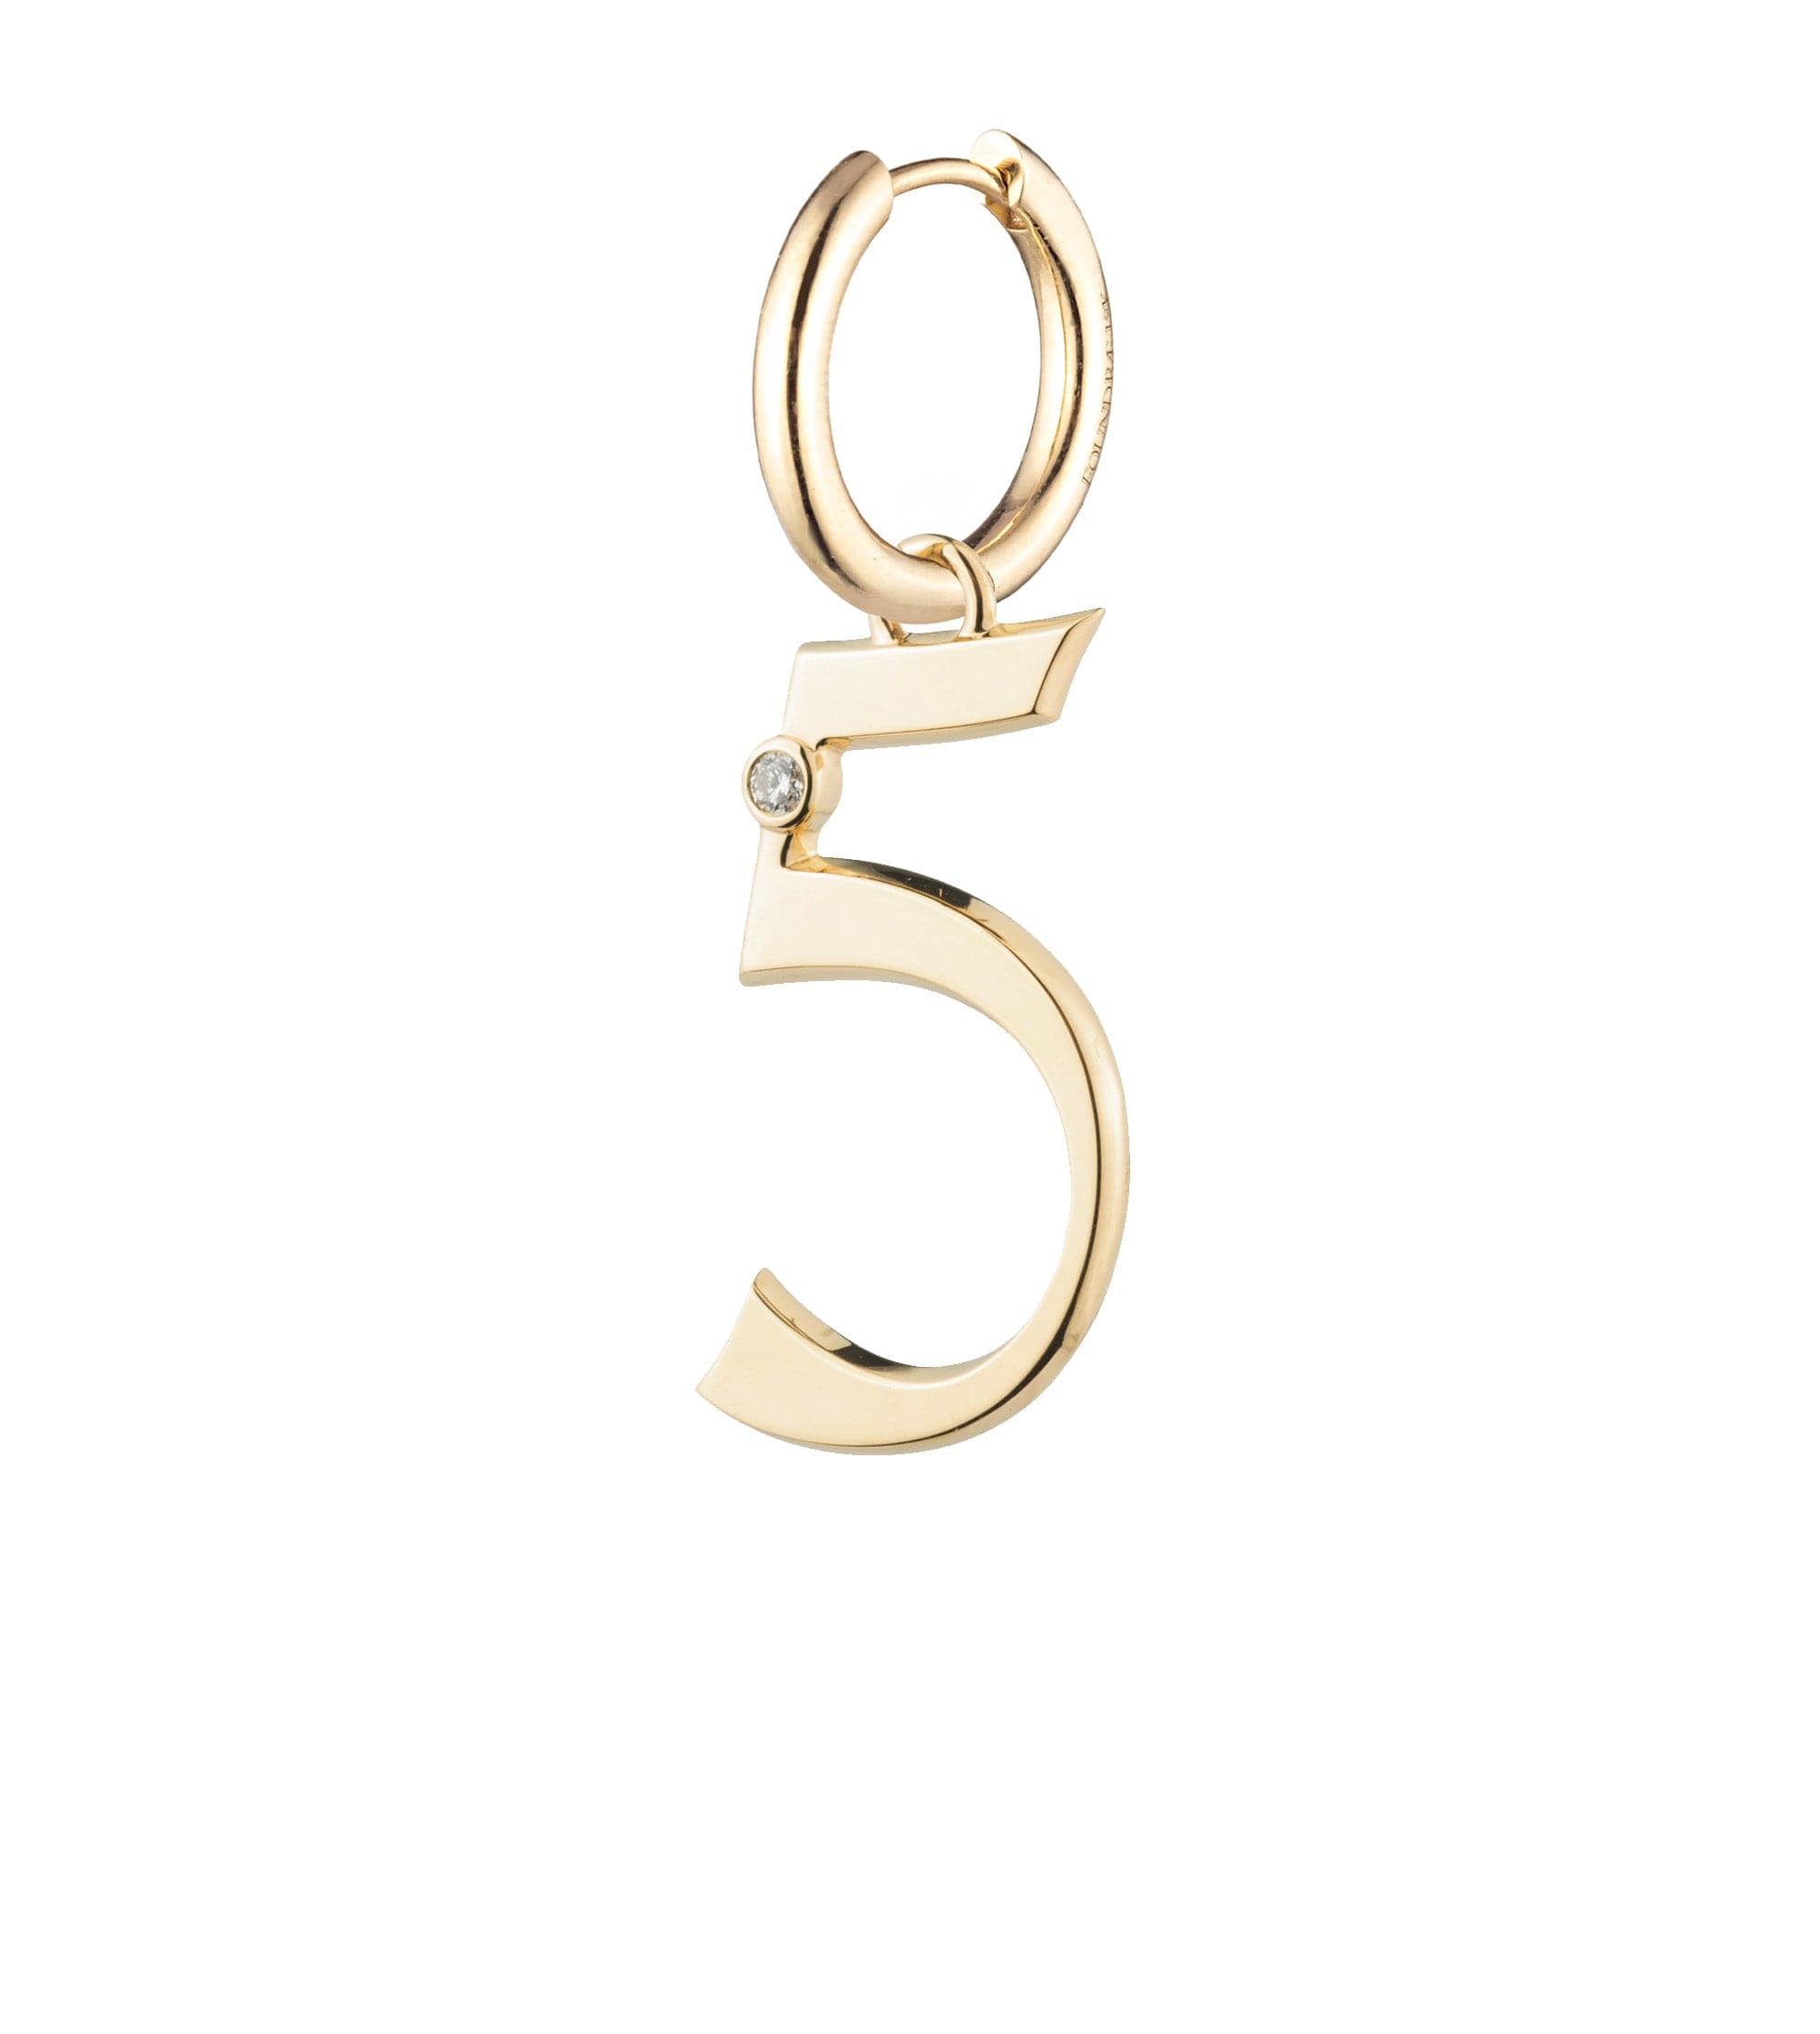 Engravable Number 5 : Oversized Small Chubby Ear Hoop